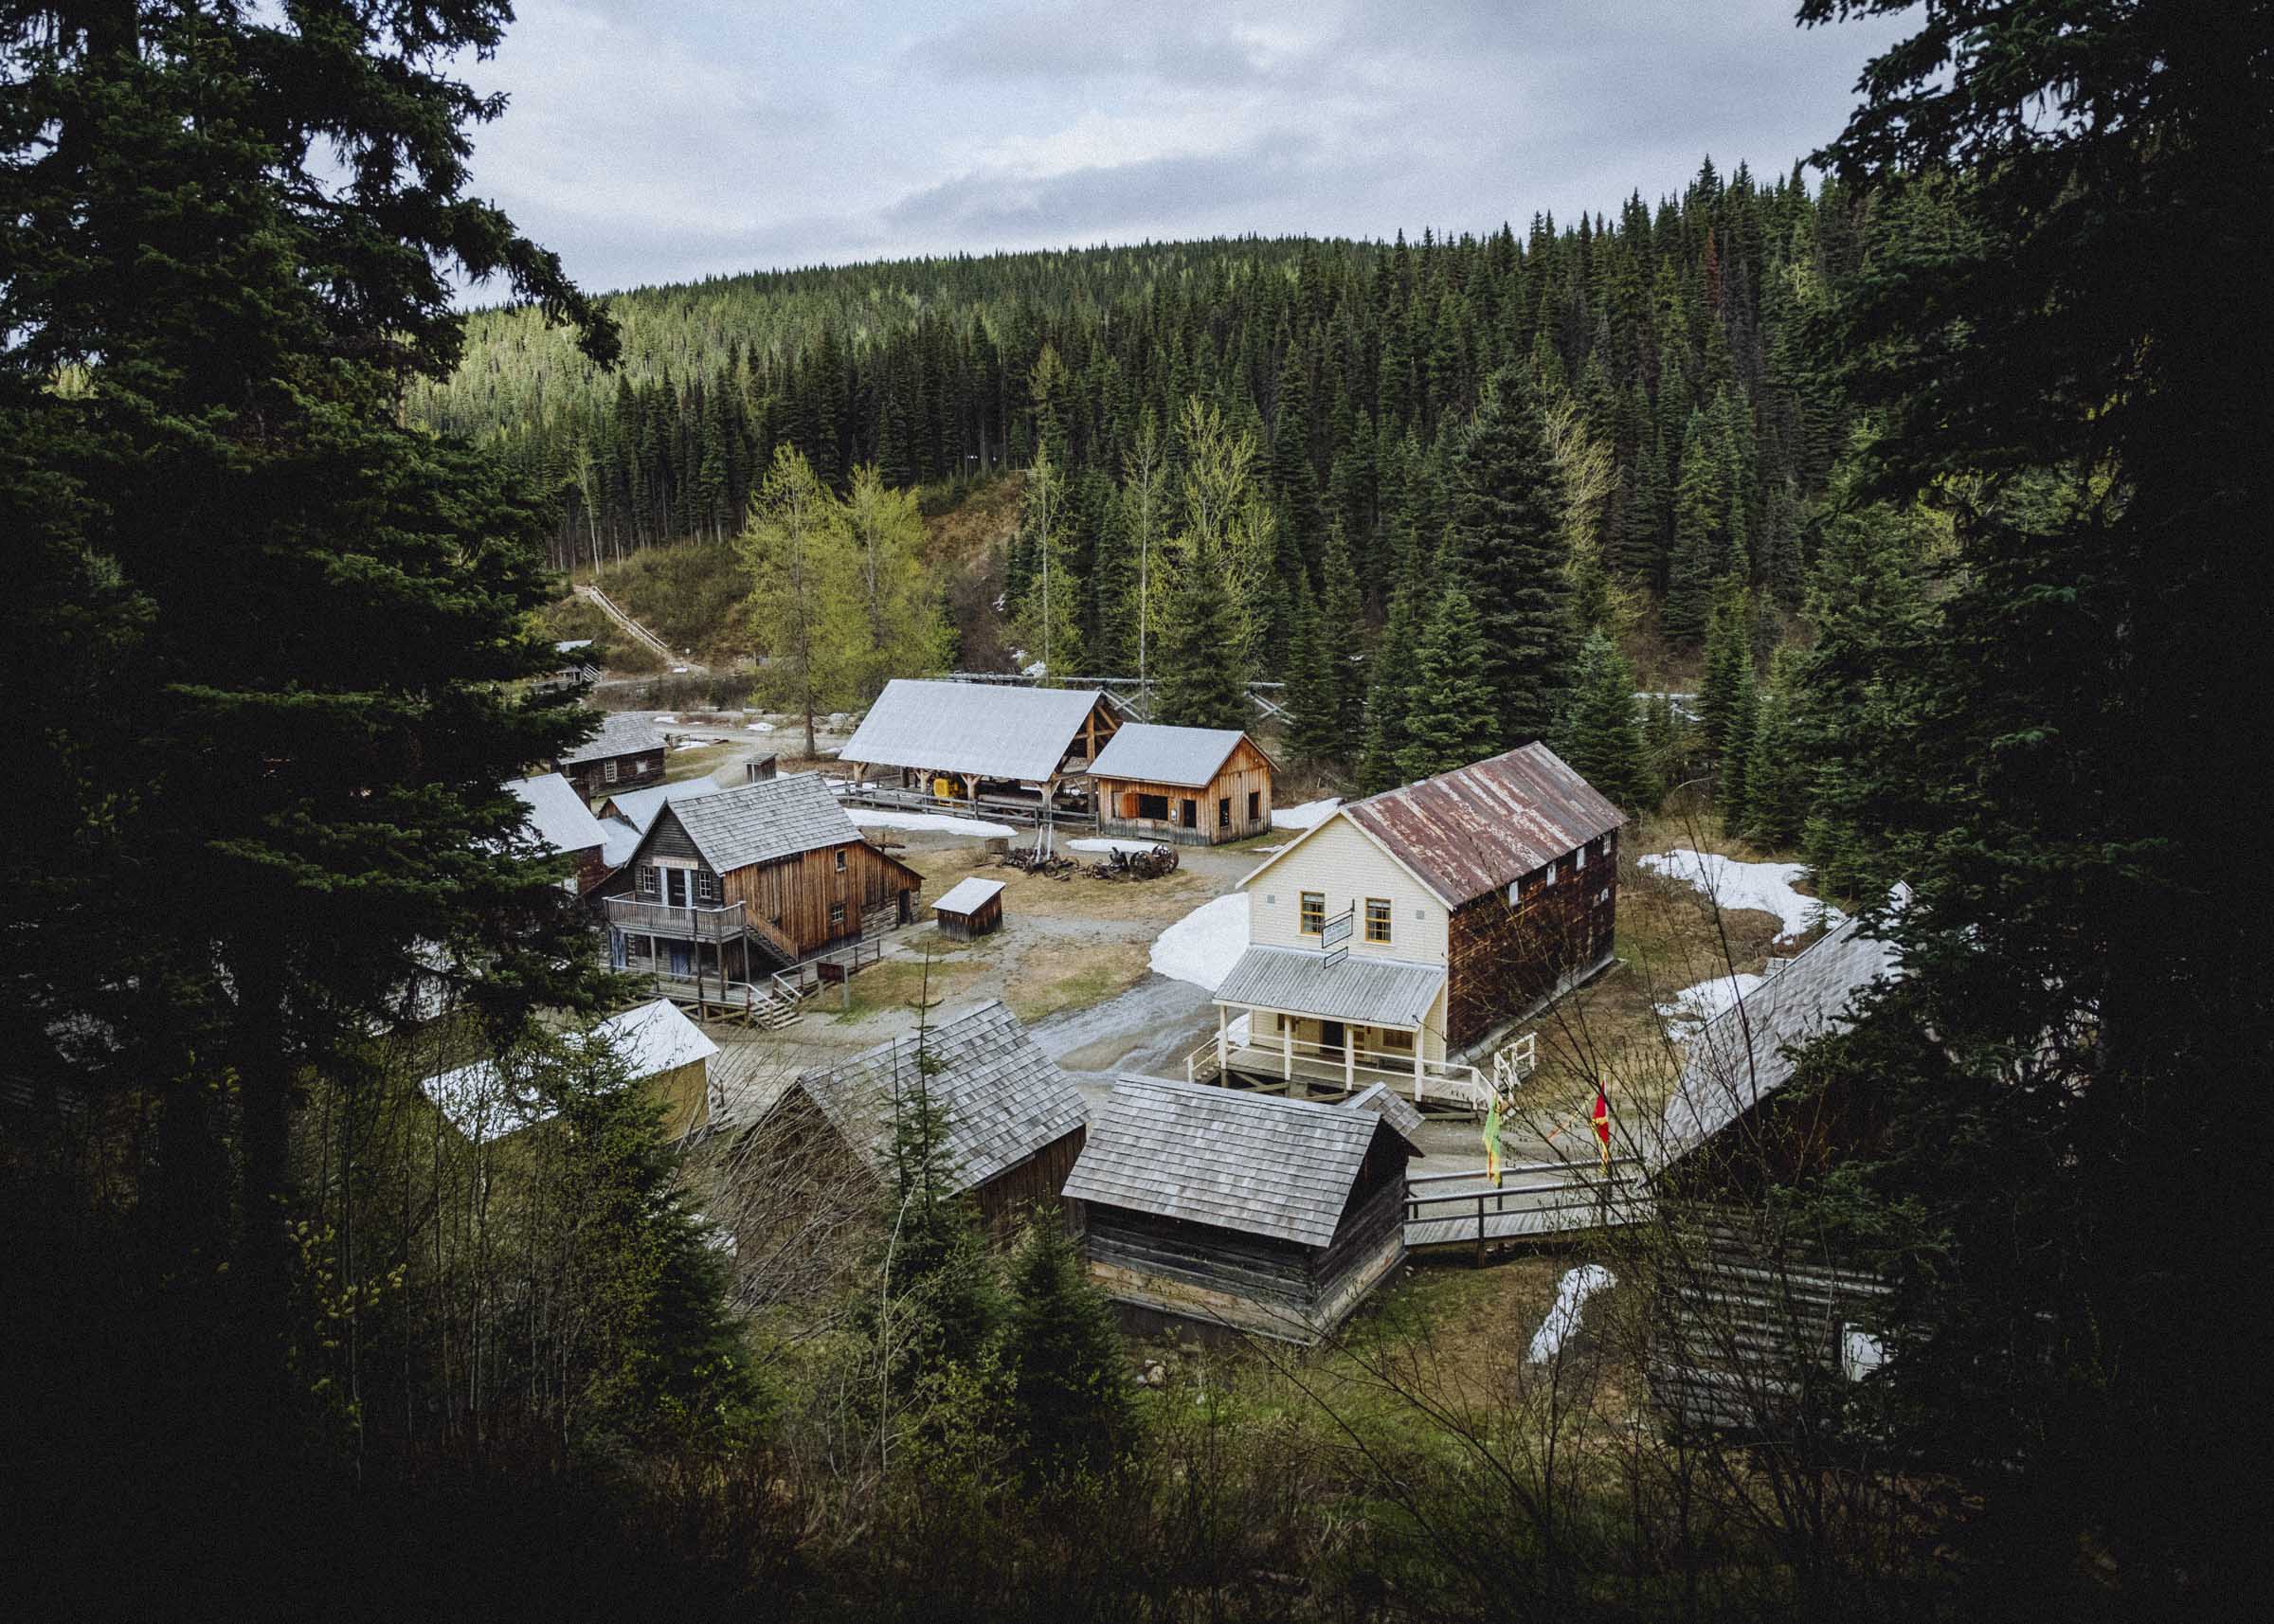 Historic Barkerville of the Cariboo Gold Rush